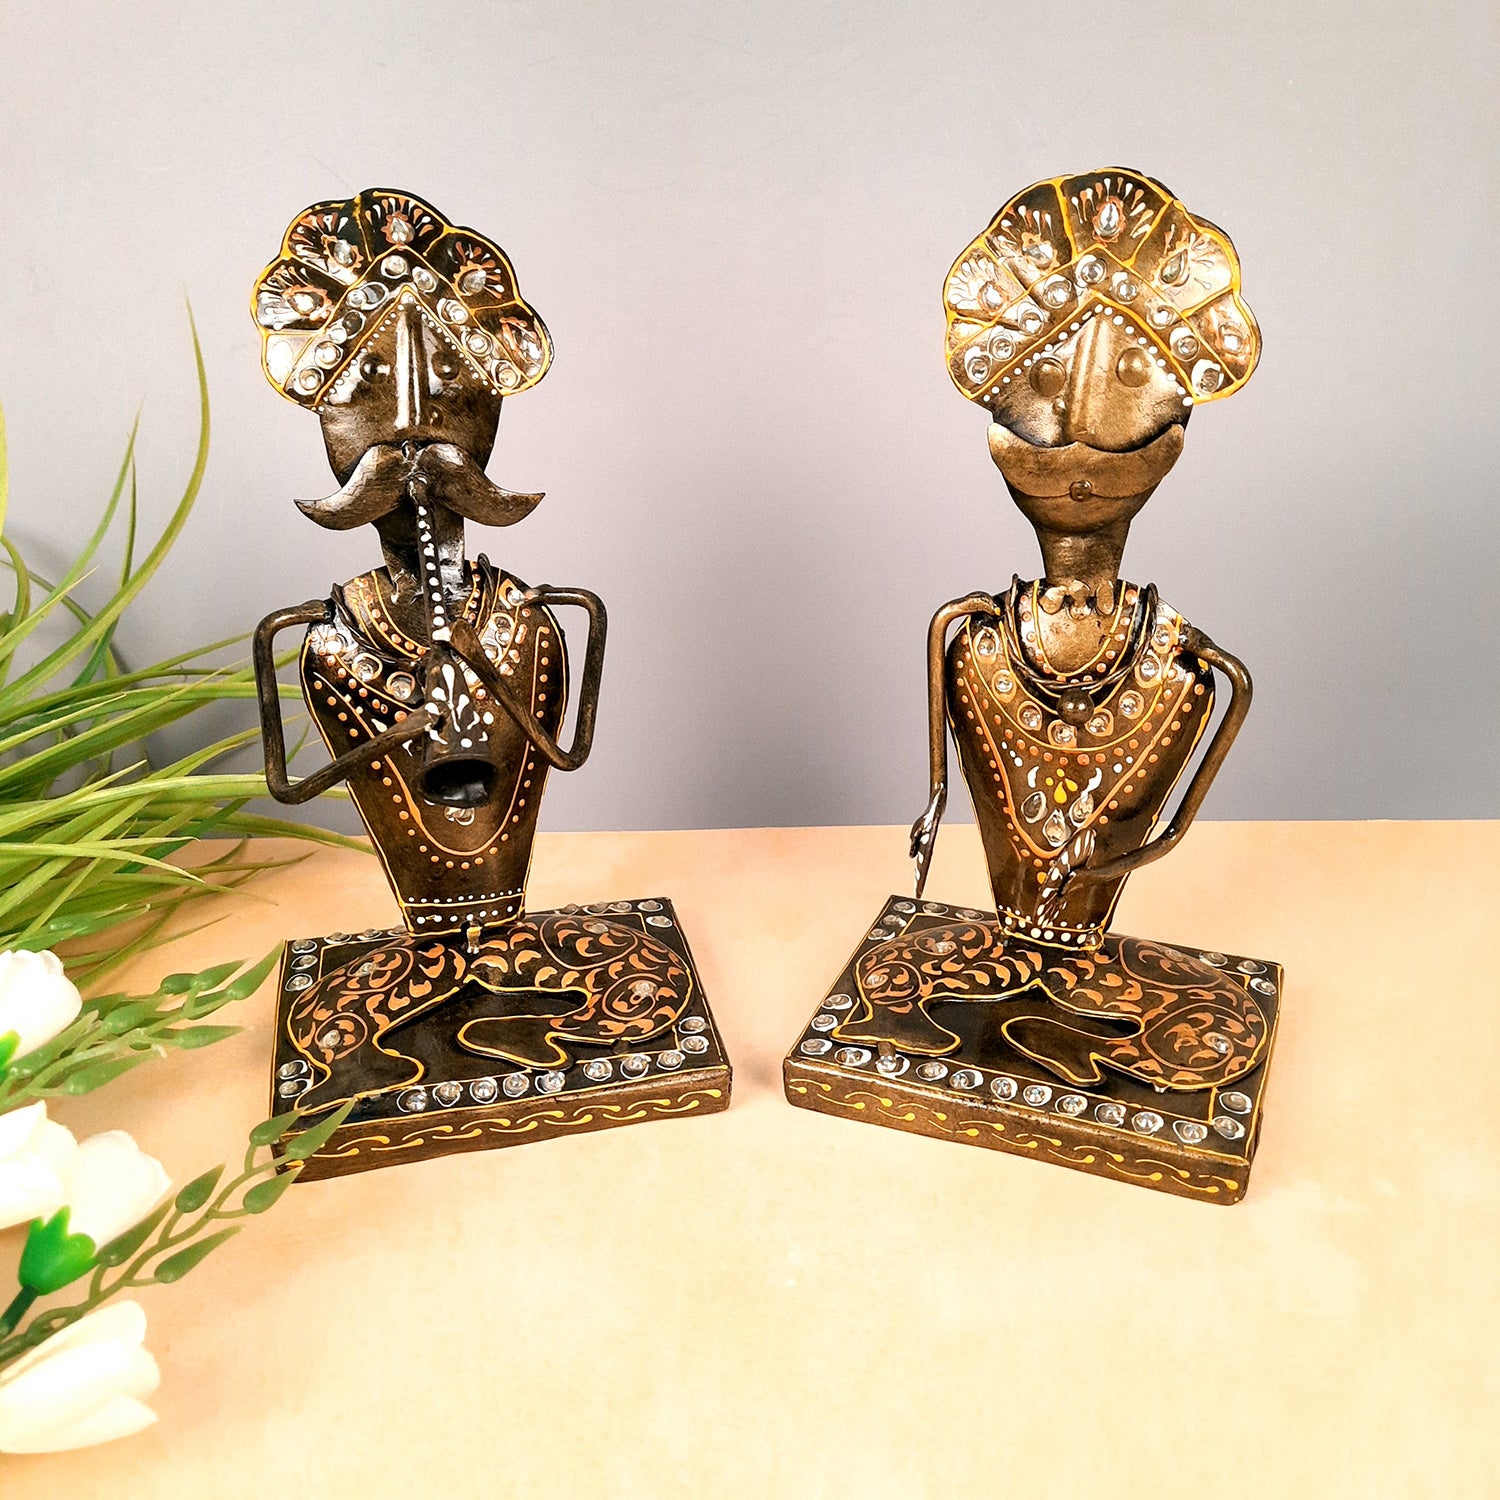 Musician Showpiece Playing Musical Instruments | Decorative Showpieces for Home, Bedroom, Living Room, Office Desk & Table | Gifts For Wedding, Housewarming & Festivals - 9 Inch (Set of 2) - Apkamart #Style_Design 1